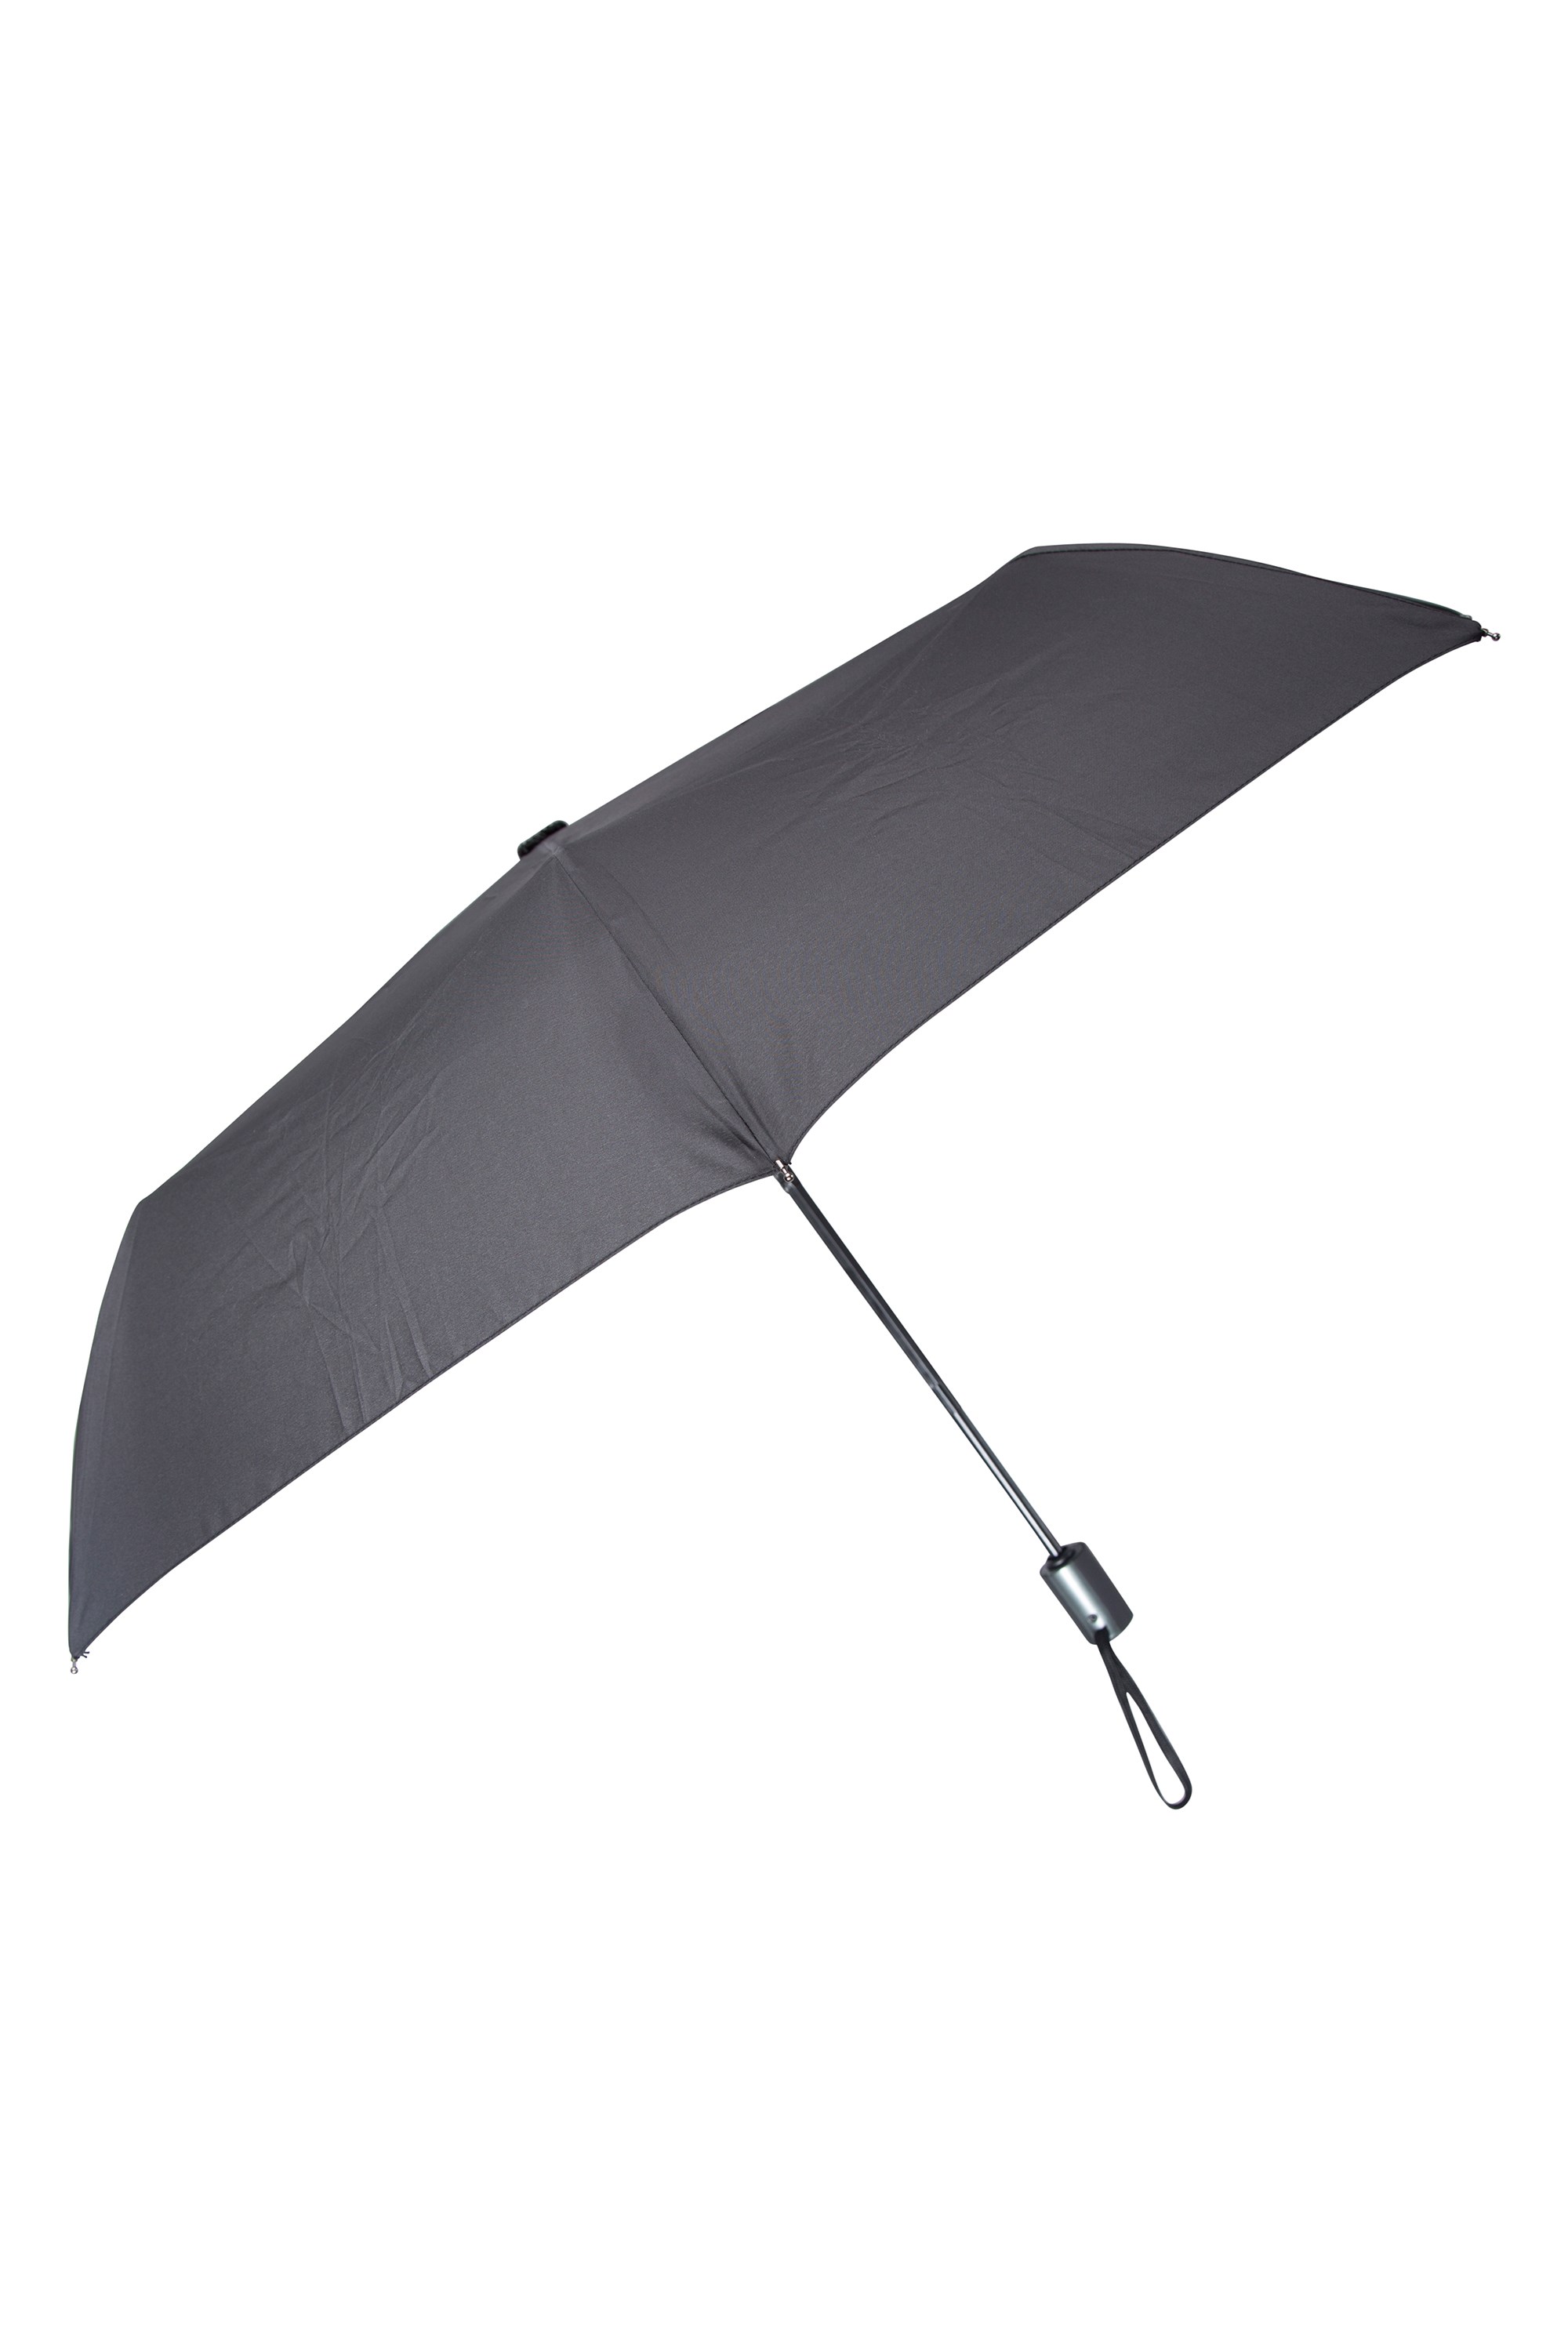 Easy to Use Patio Brolly Stainless Steel Shaft Shock Resistant Garden Umbrella Mountain Warehouse Windproof Umbrella Quick Dry Sun Umbrella For Picnics 